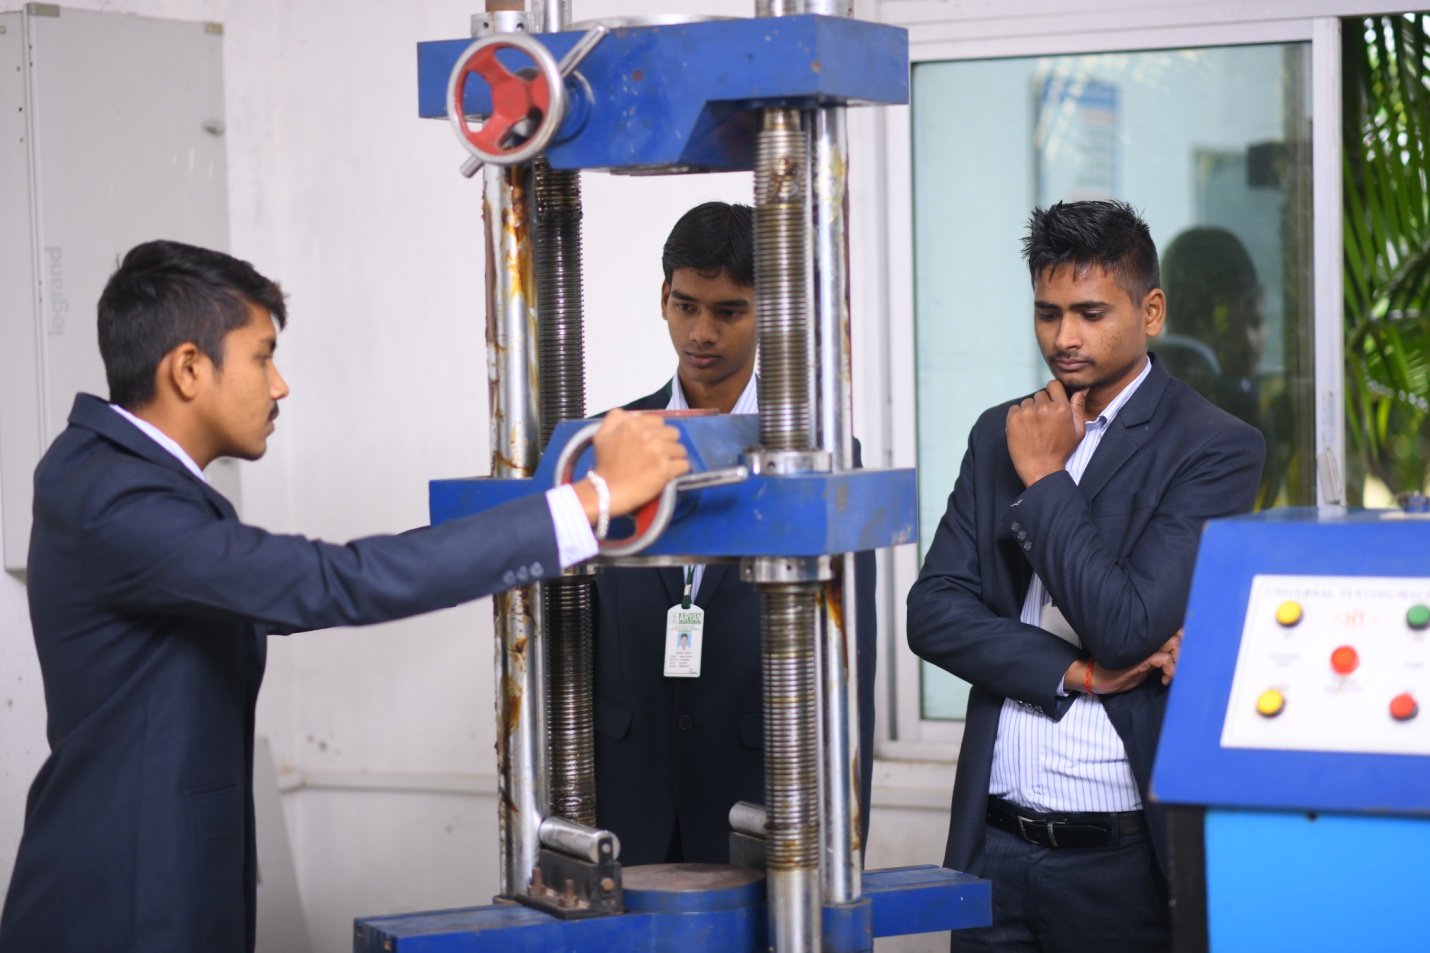 AIET - Aryan Institute of Engineering and technology,Top Mechanical Engineering  Colleges in Bhubaneswar,Mechanical Engineering Colleges In Bhubaneswar